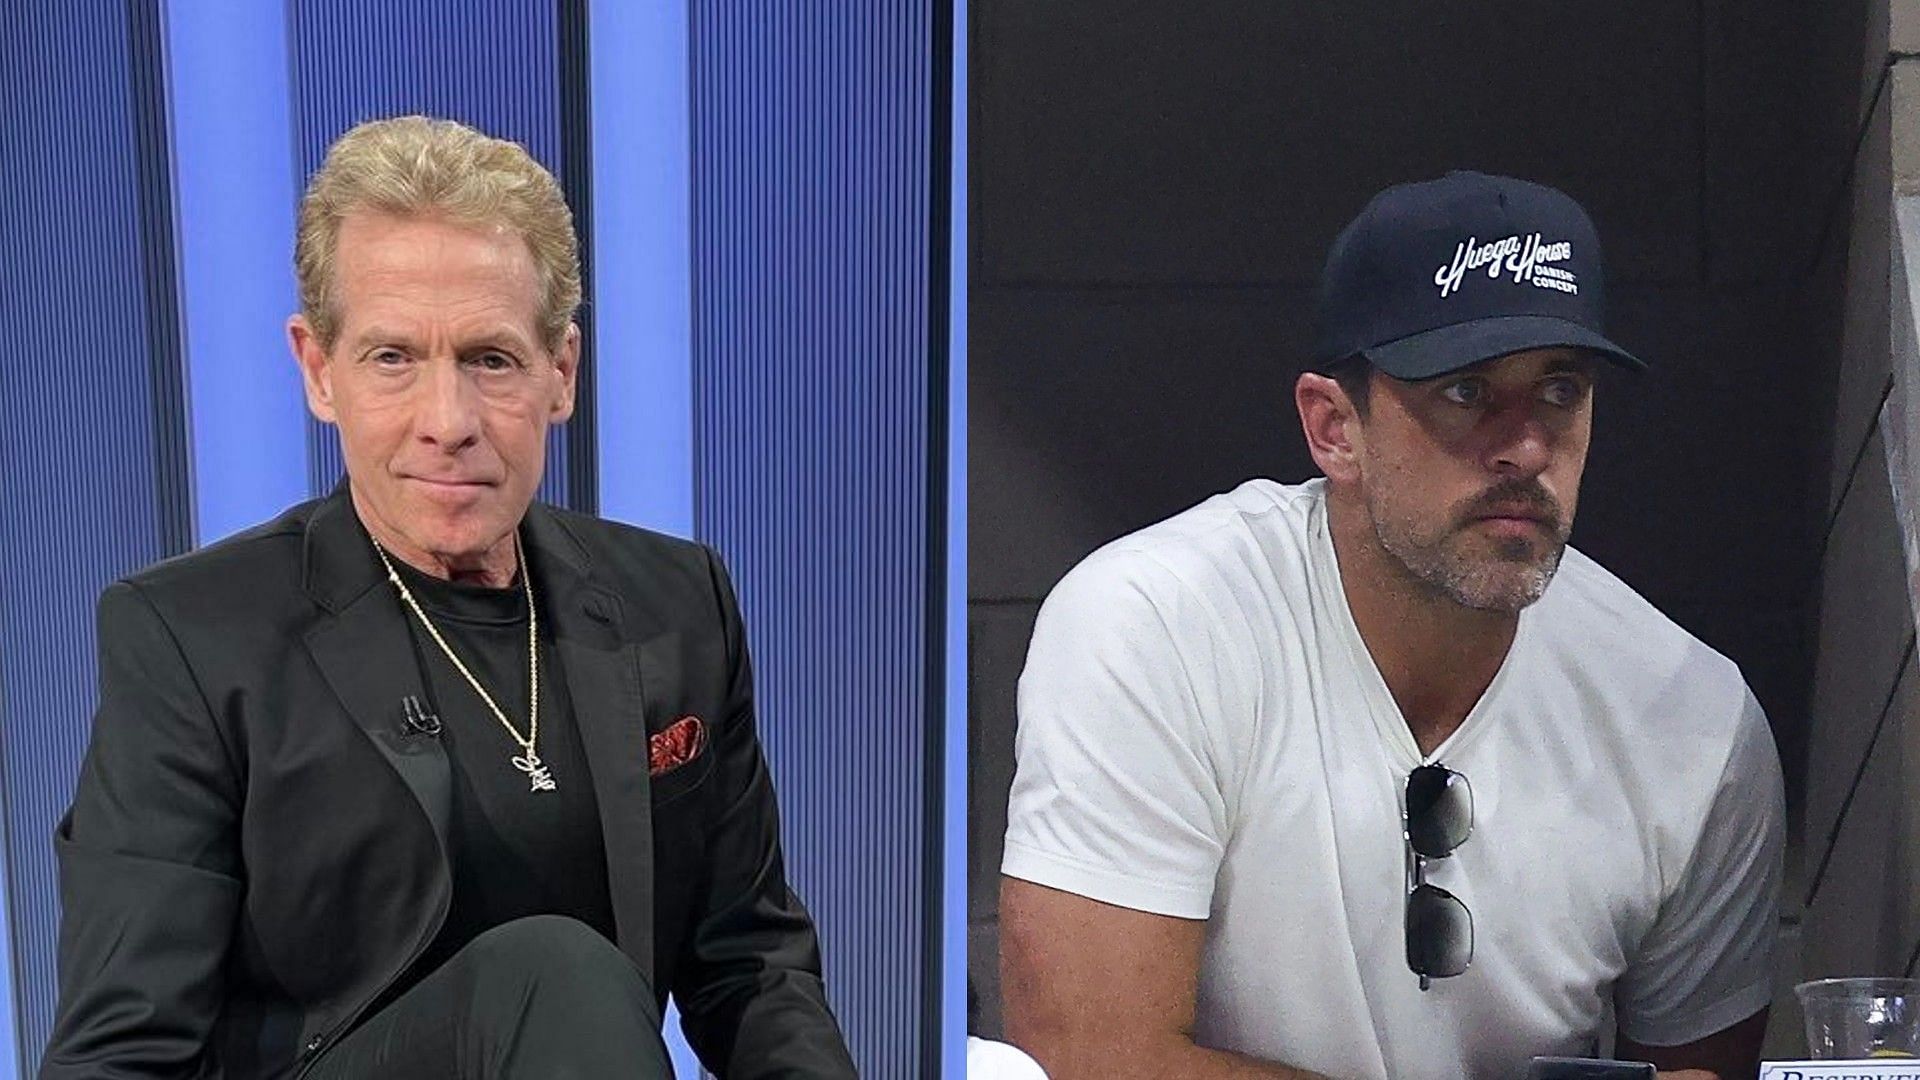 Skip Bayless takes aim at Aaron Rodgers, claims Jets QB is &lsquo;afraid&rsquo; to debate on Undisputed - Courtesy of Skip Bayless on Instagram